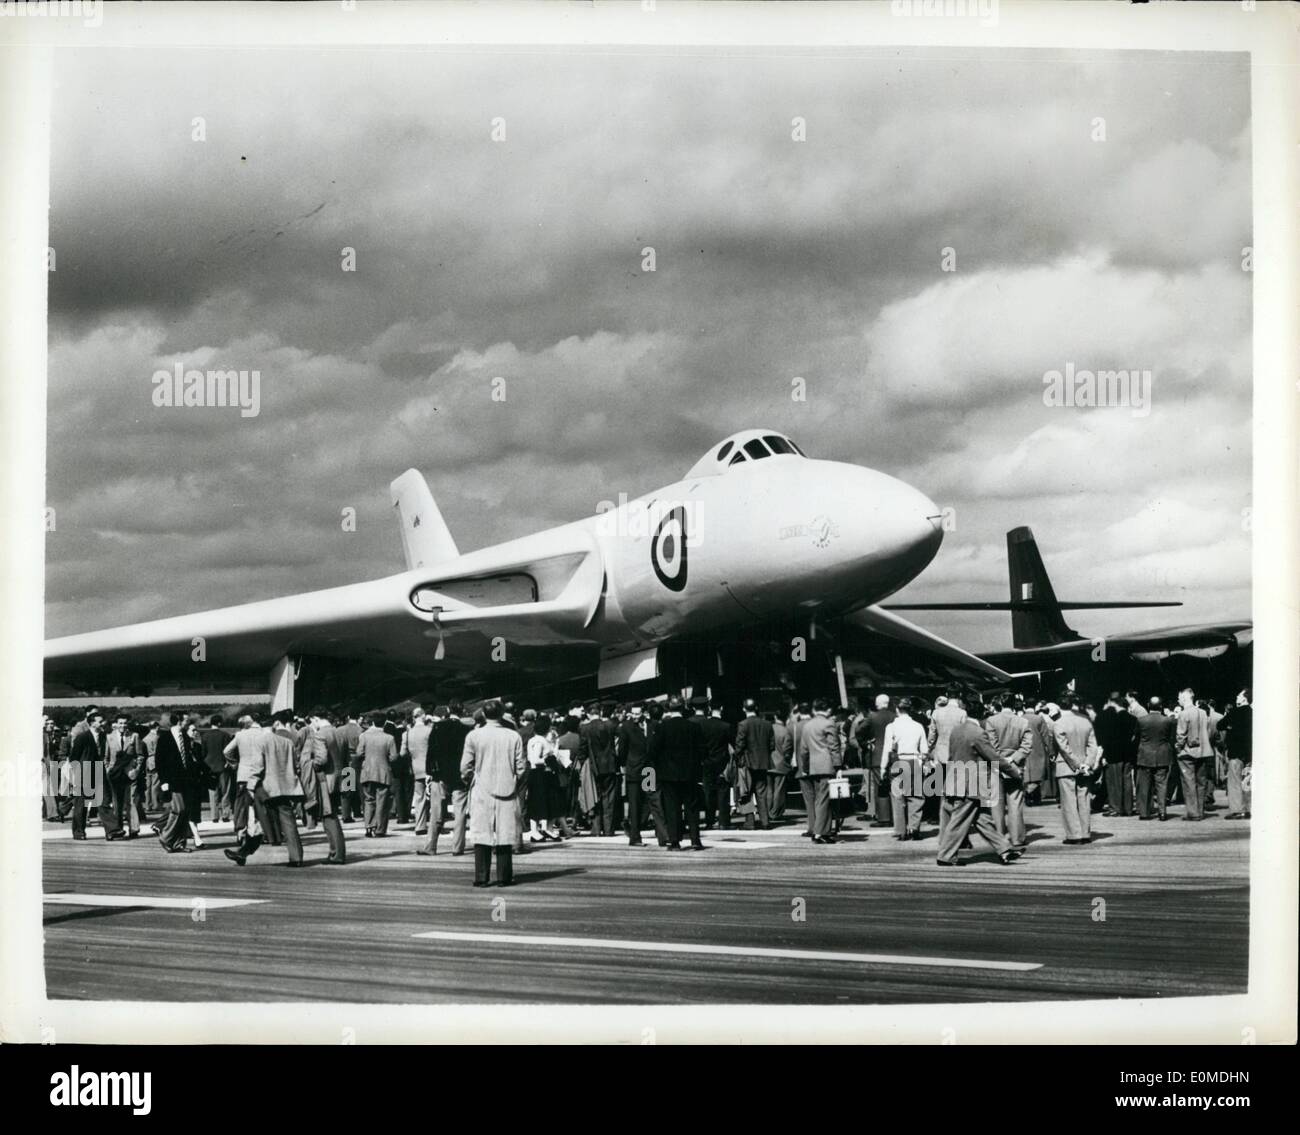 Sep. 09, 1954 - Atom Bomber Stops The Show: Aviation experts and technicians from all over the world recently attended the Society of British Aircraft Constructors' annual Flying Display and Exhibition at Farnborough, England. Military stars of the show were three multi-engined jet atom bombers, the Vickers Valiant, the Avro Vulcan and the Handley Page Victor. On the civil aviation side were the turbo-prop airliners Vickers Viscount, the Bristol Britannia and the jet Comet III Stock Photo